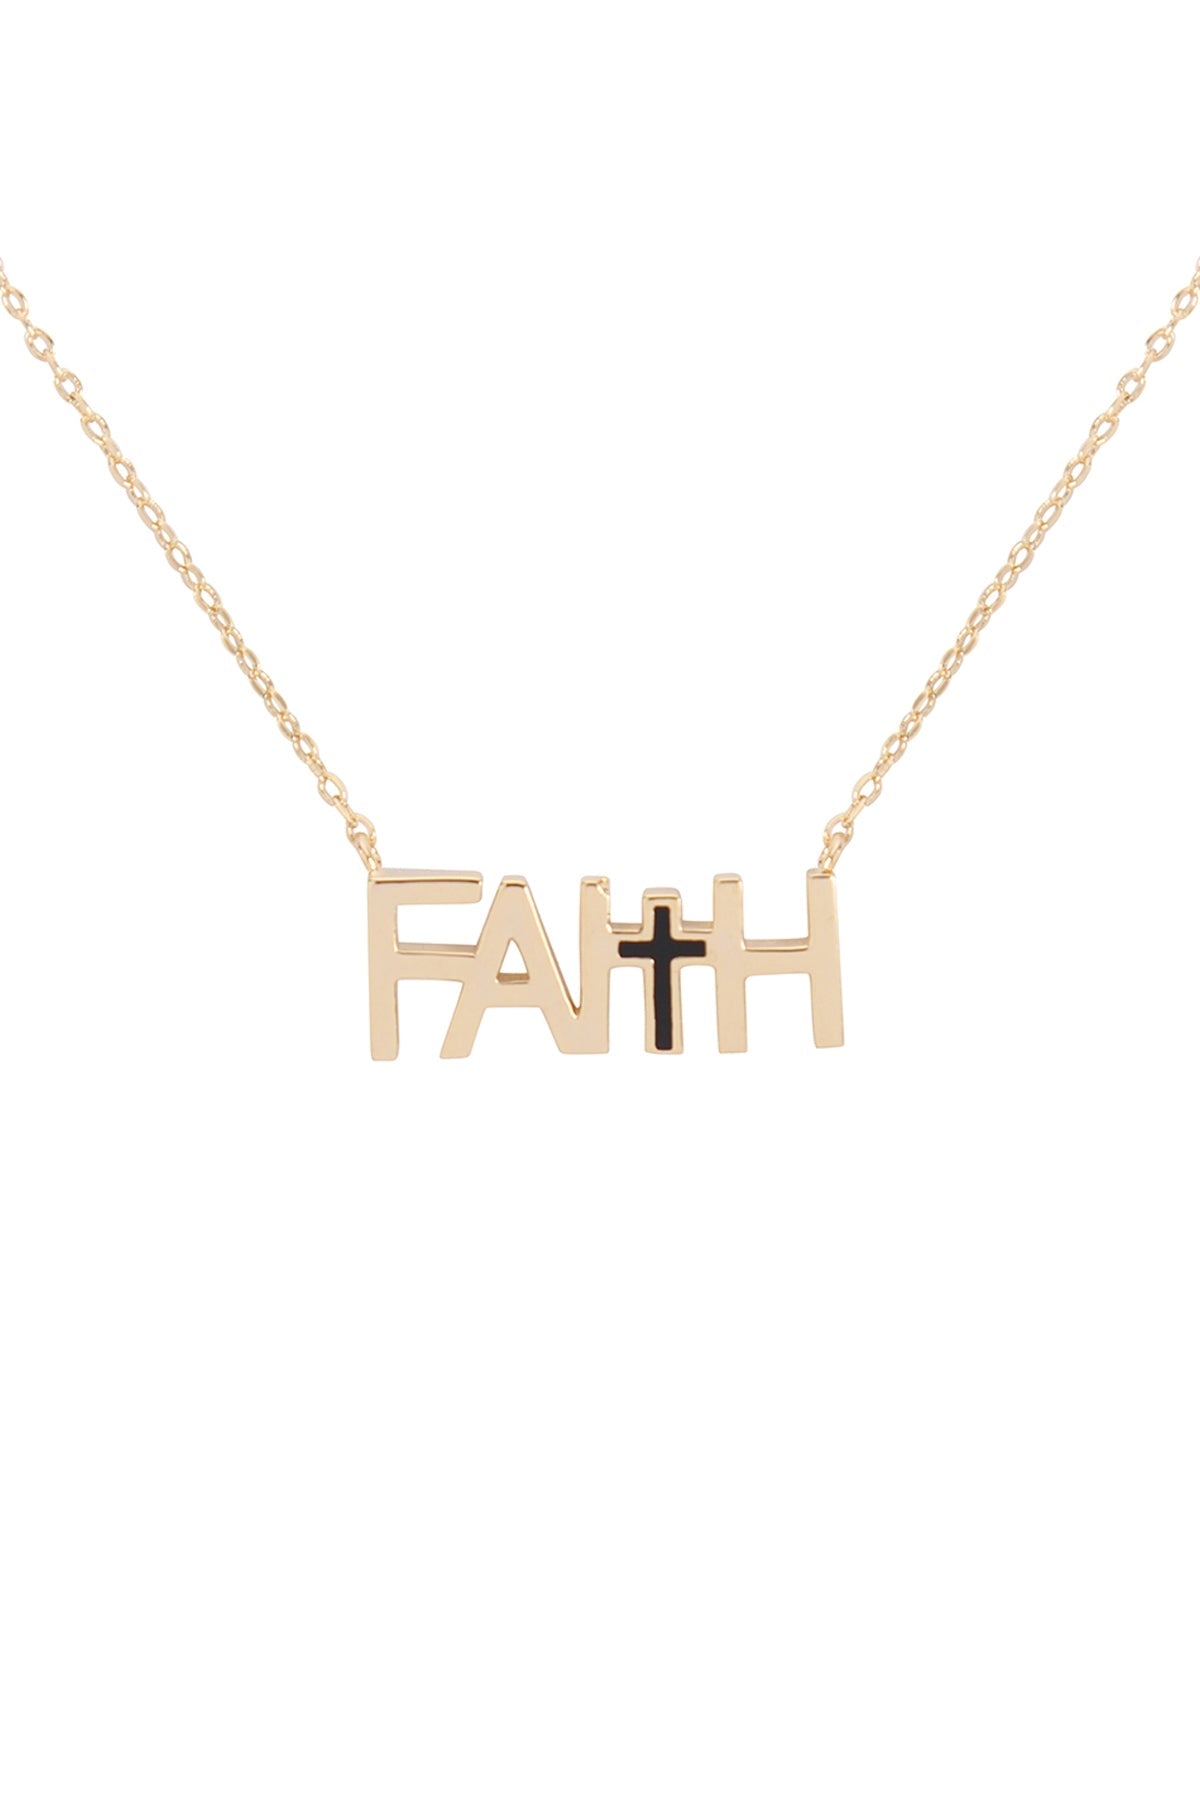 FAITH WITH CROSS INSPIRATIONAL NECKLACE